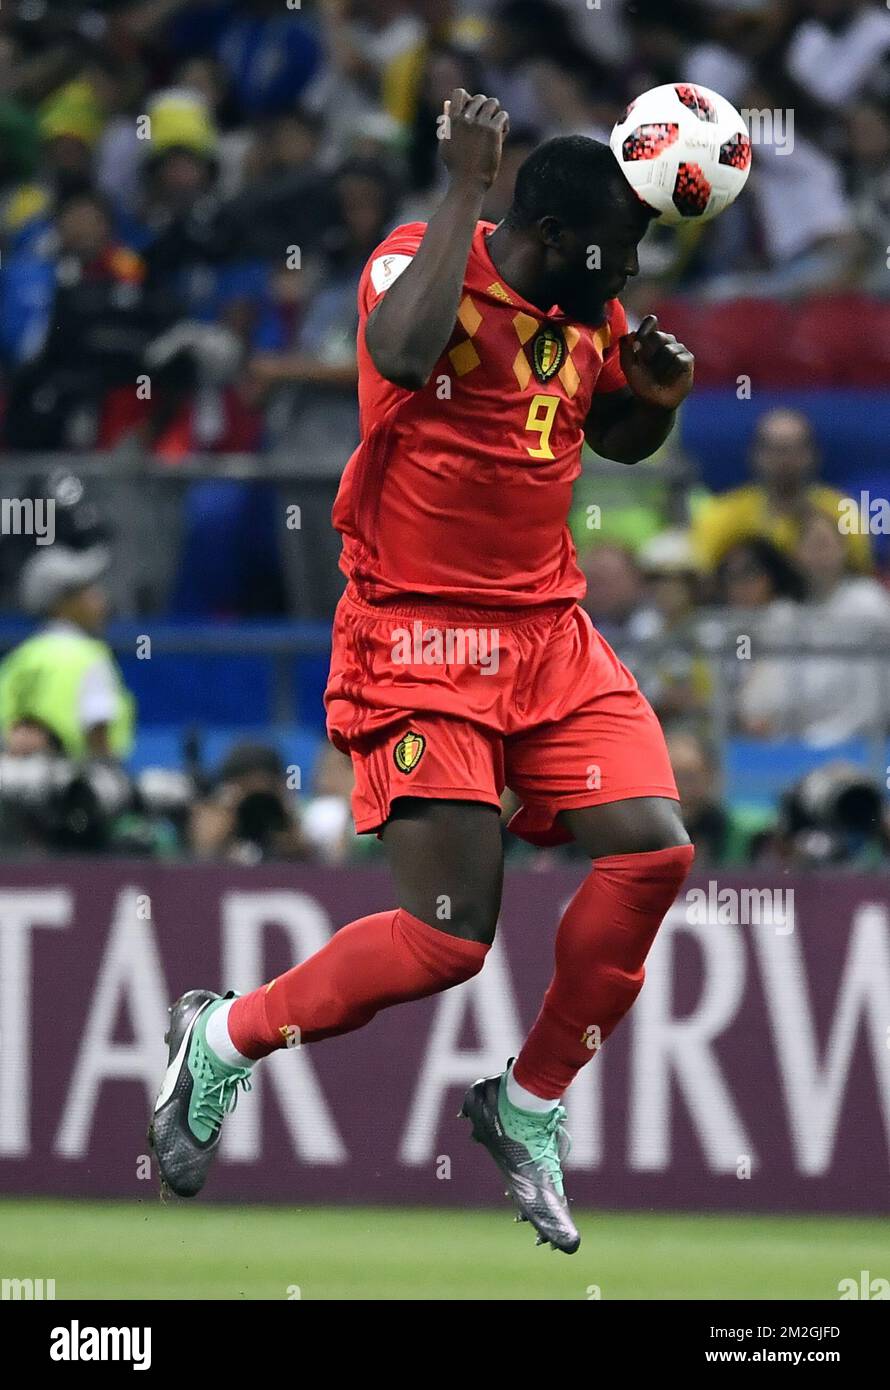 Belgium's Romelu Lukaku heads the ball during a soccer game between Belgian national soccer team the Red Devils and Brazil in Kazan, Russia, Friday 06 July 2018, the quarter-finals of the 2018 FIFA World Cup. BELGA PHOTO DIRK WAEM  Stock Photo